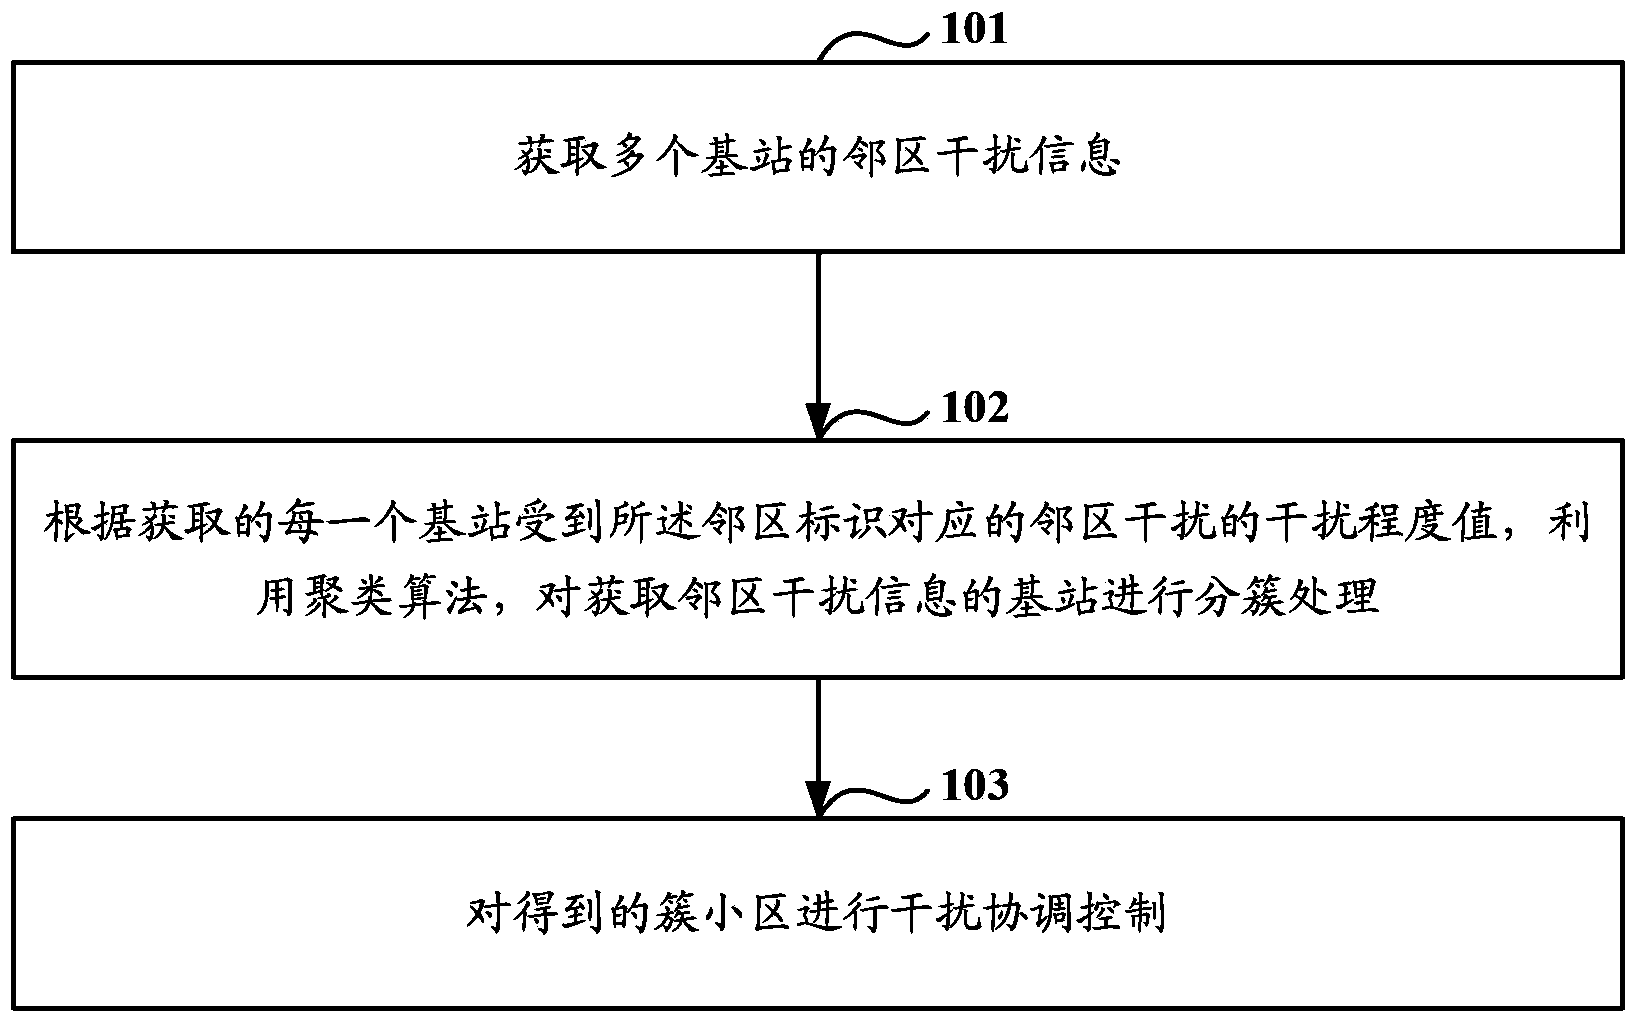 Method for performing interference coordination control on cell, and equipment thereof